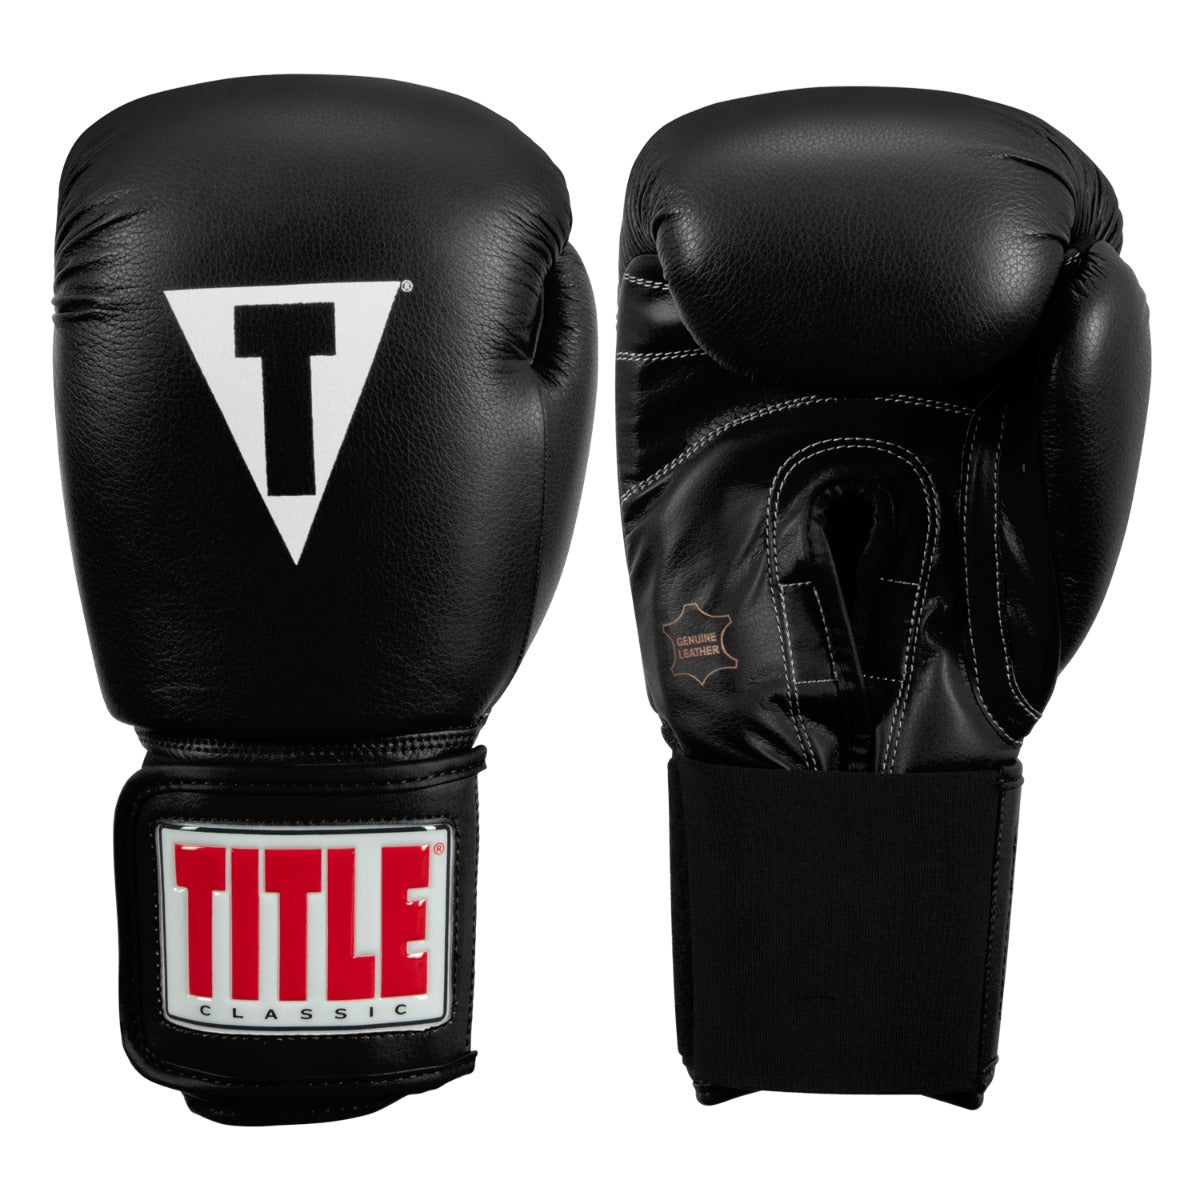 Title Boxing Incredi-Ball Leather Training Punch Mitts 2.0 